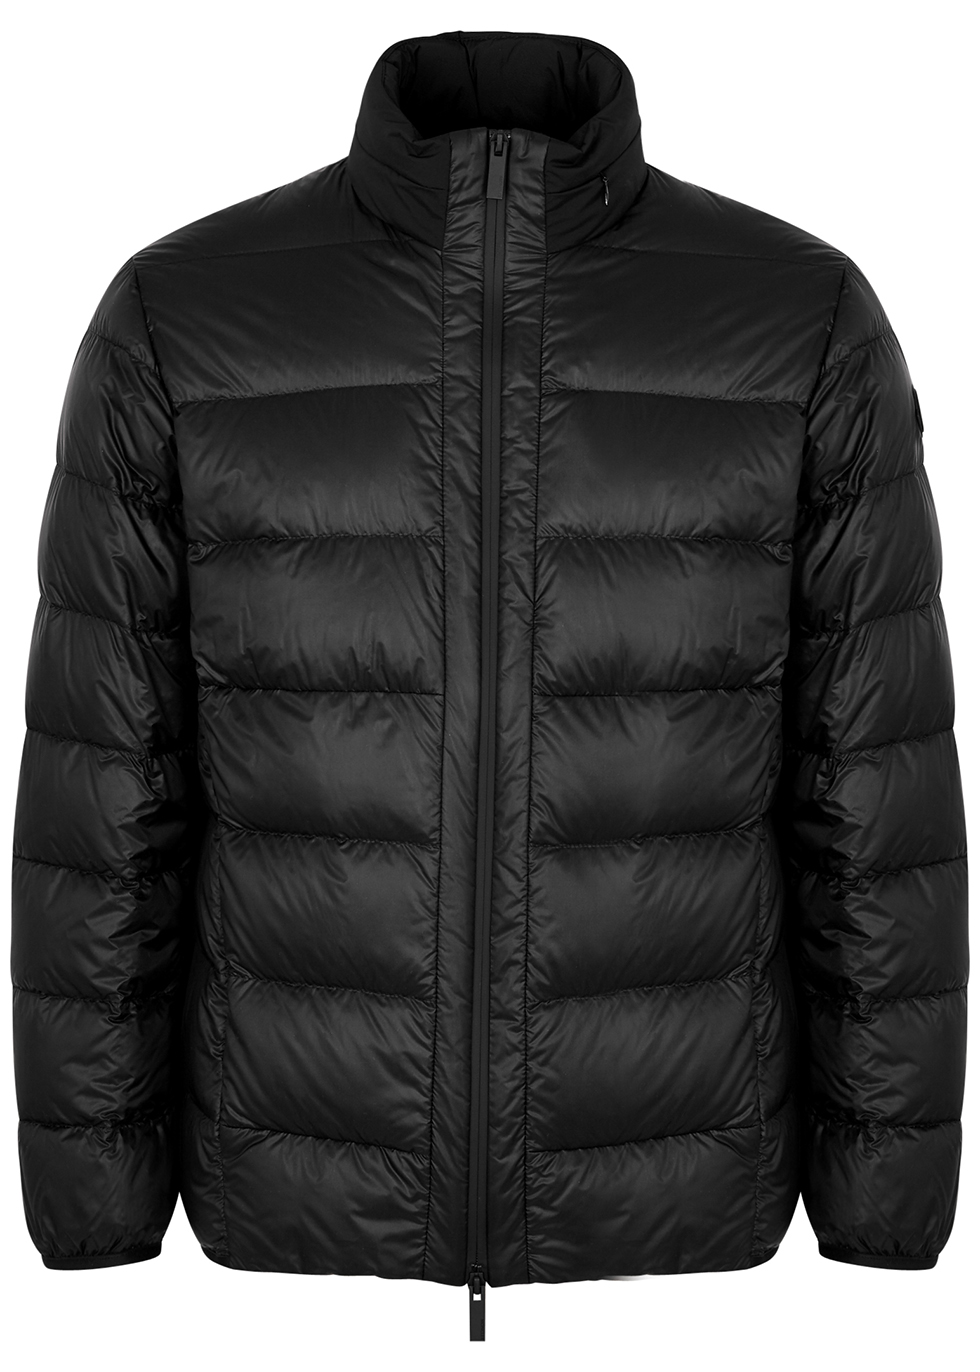 Moncler Peyre black quilted shell jacket - Harvey Nichols